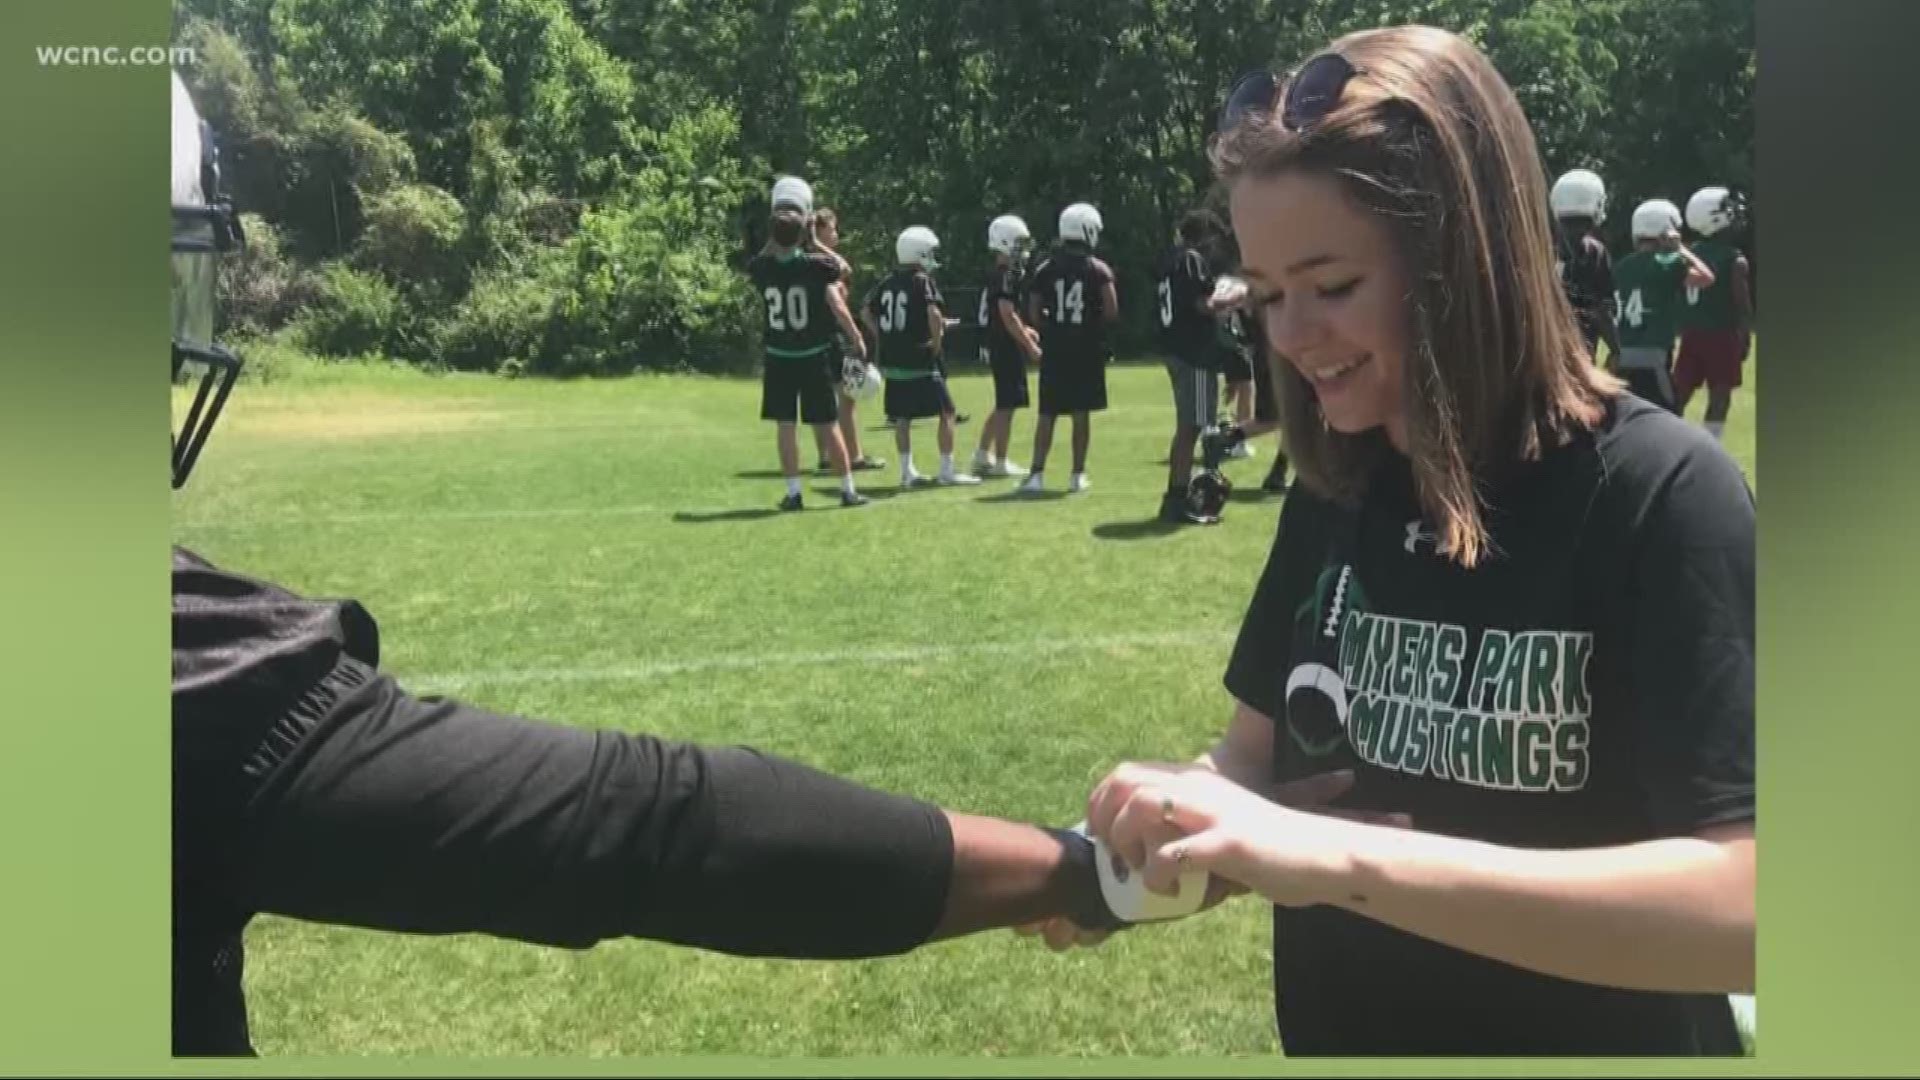 A Myers Park High School student-athlete who suffered a career-ending concussion is now working to help other student-athletes.